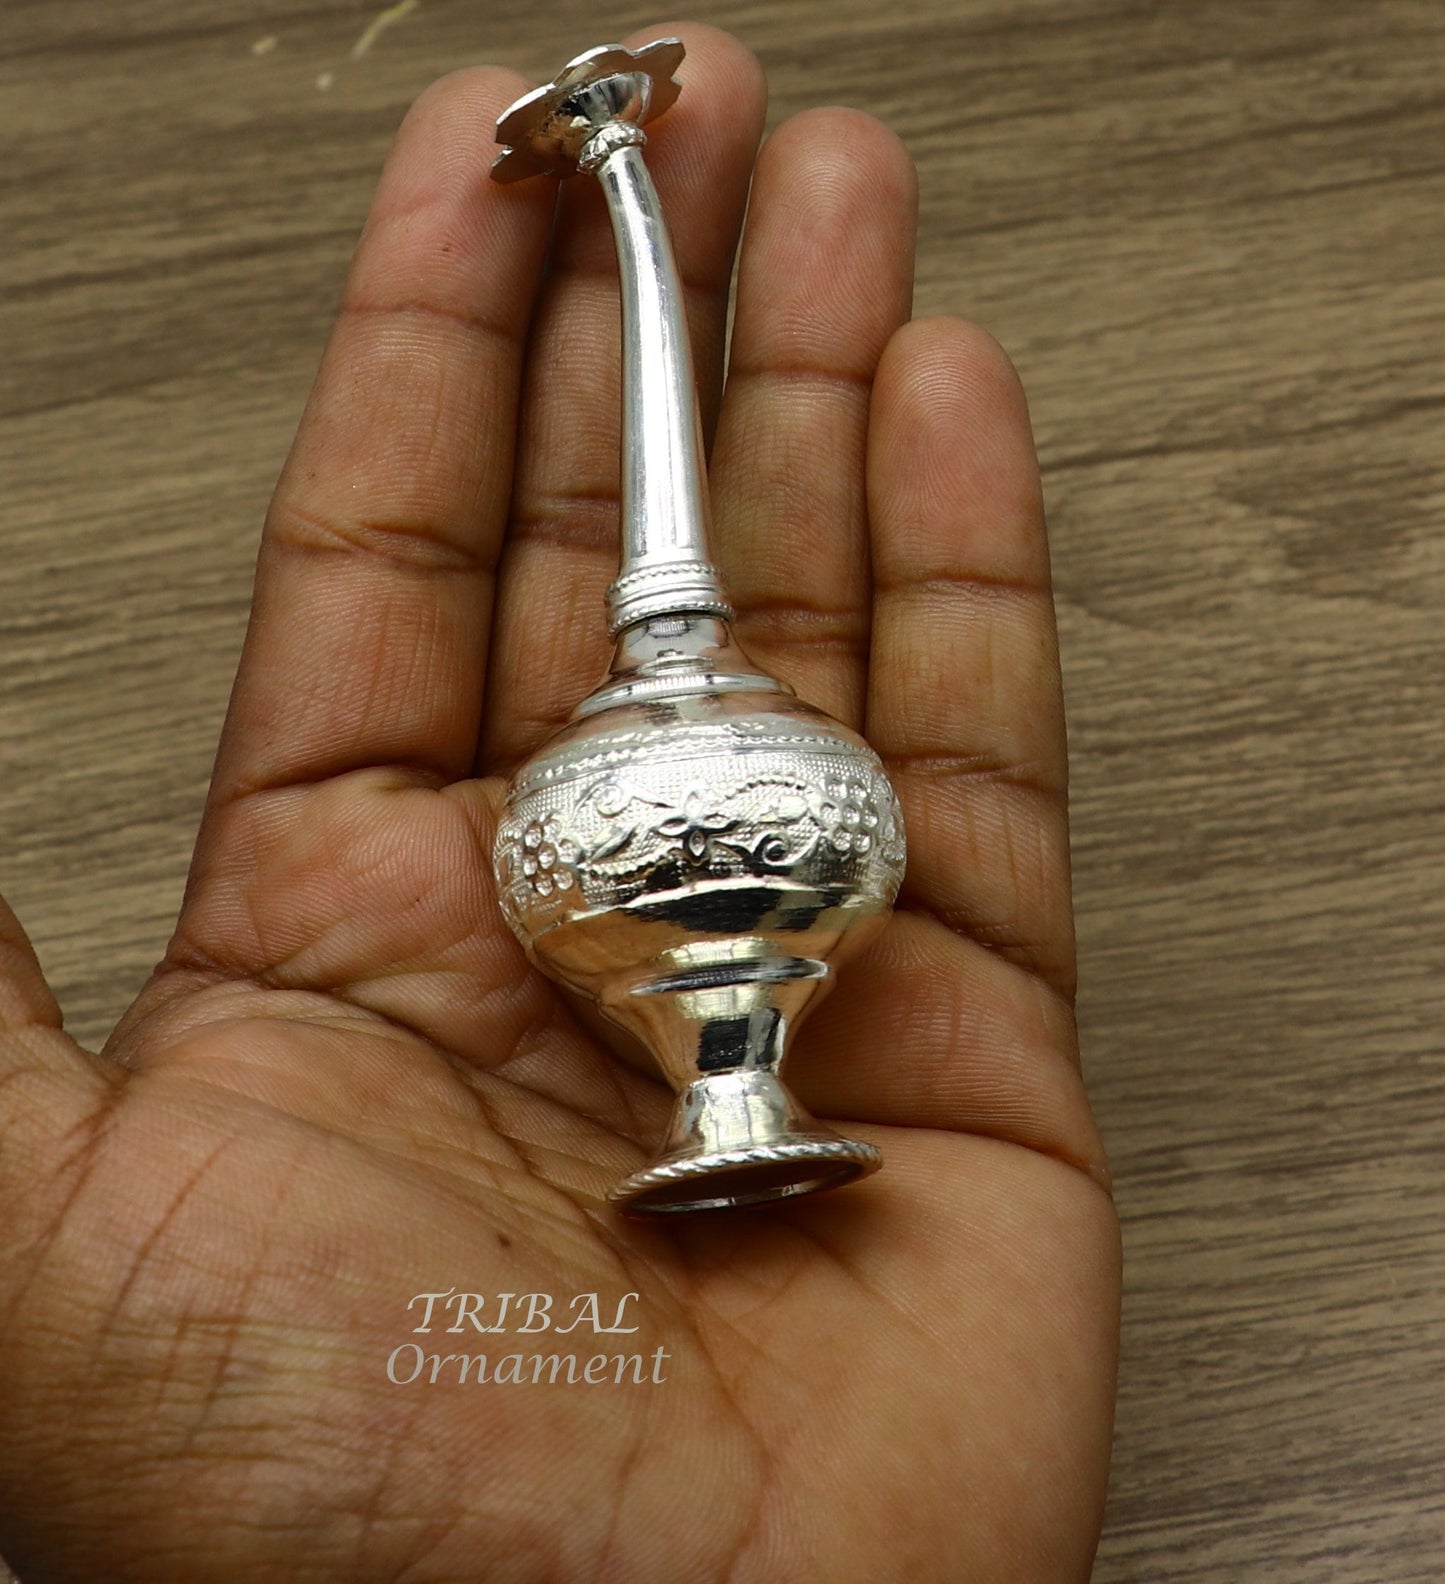 925 sterling silver customized design silver spray bottle, silver perfume bottle, royal style spray article, puja utensils, best gift su979 - TRIBAL ORNAMENTS